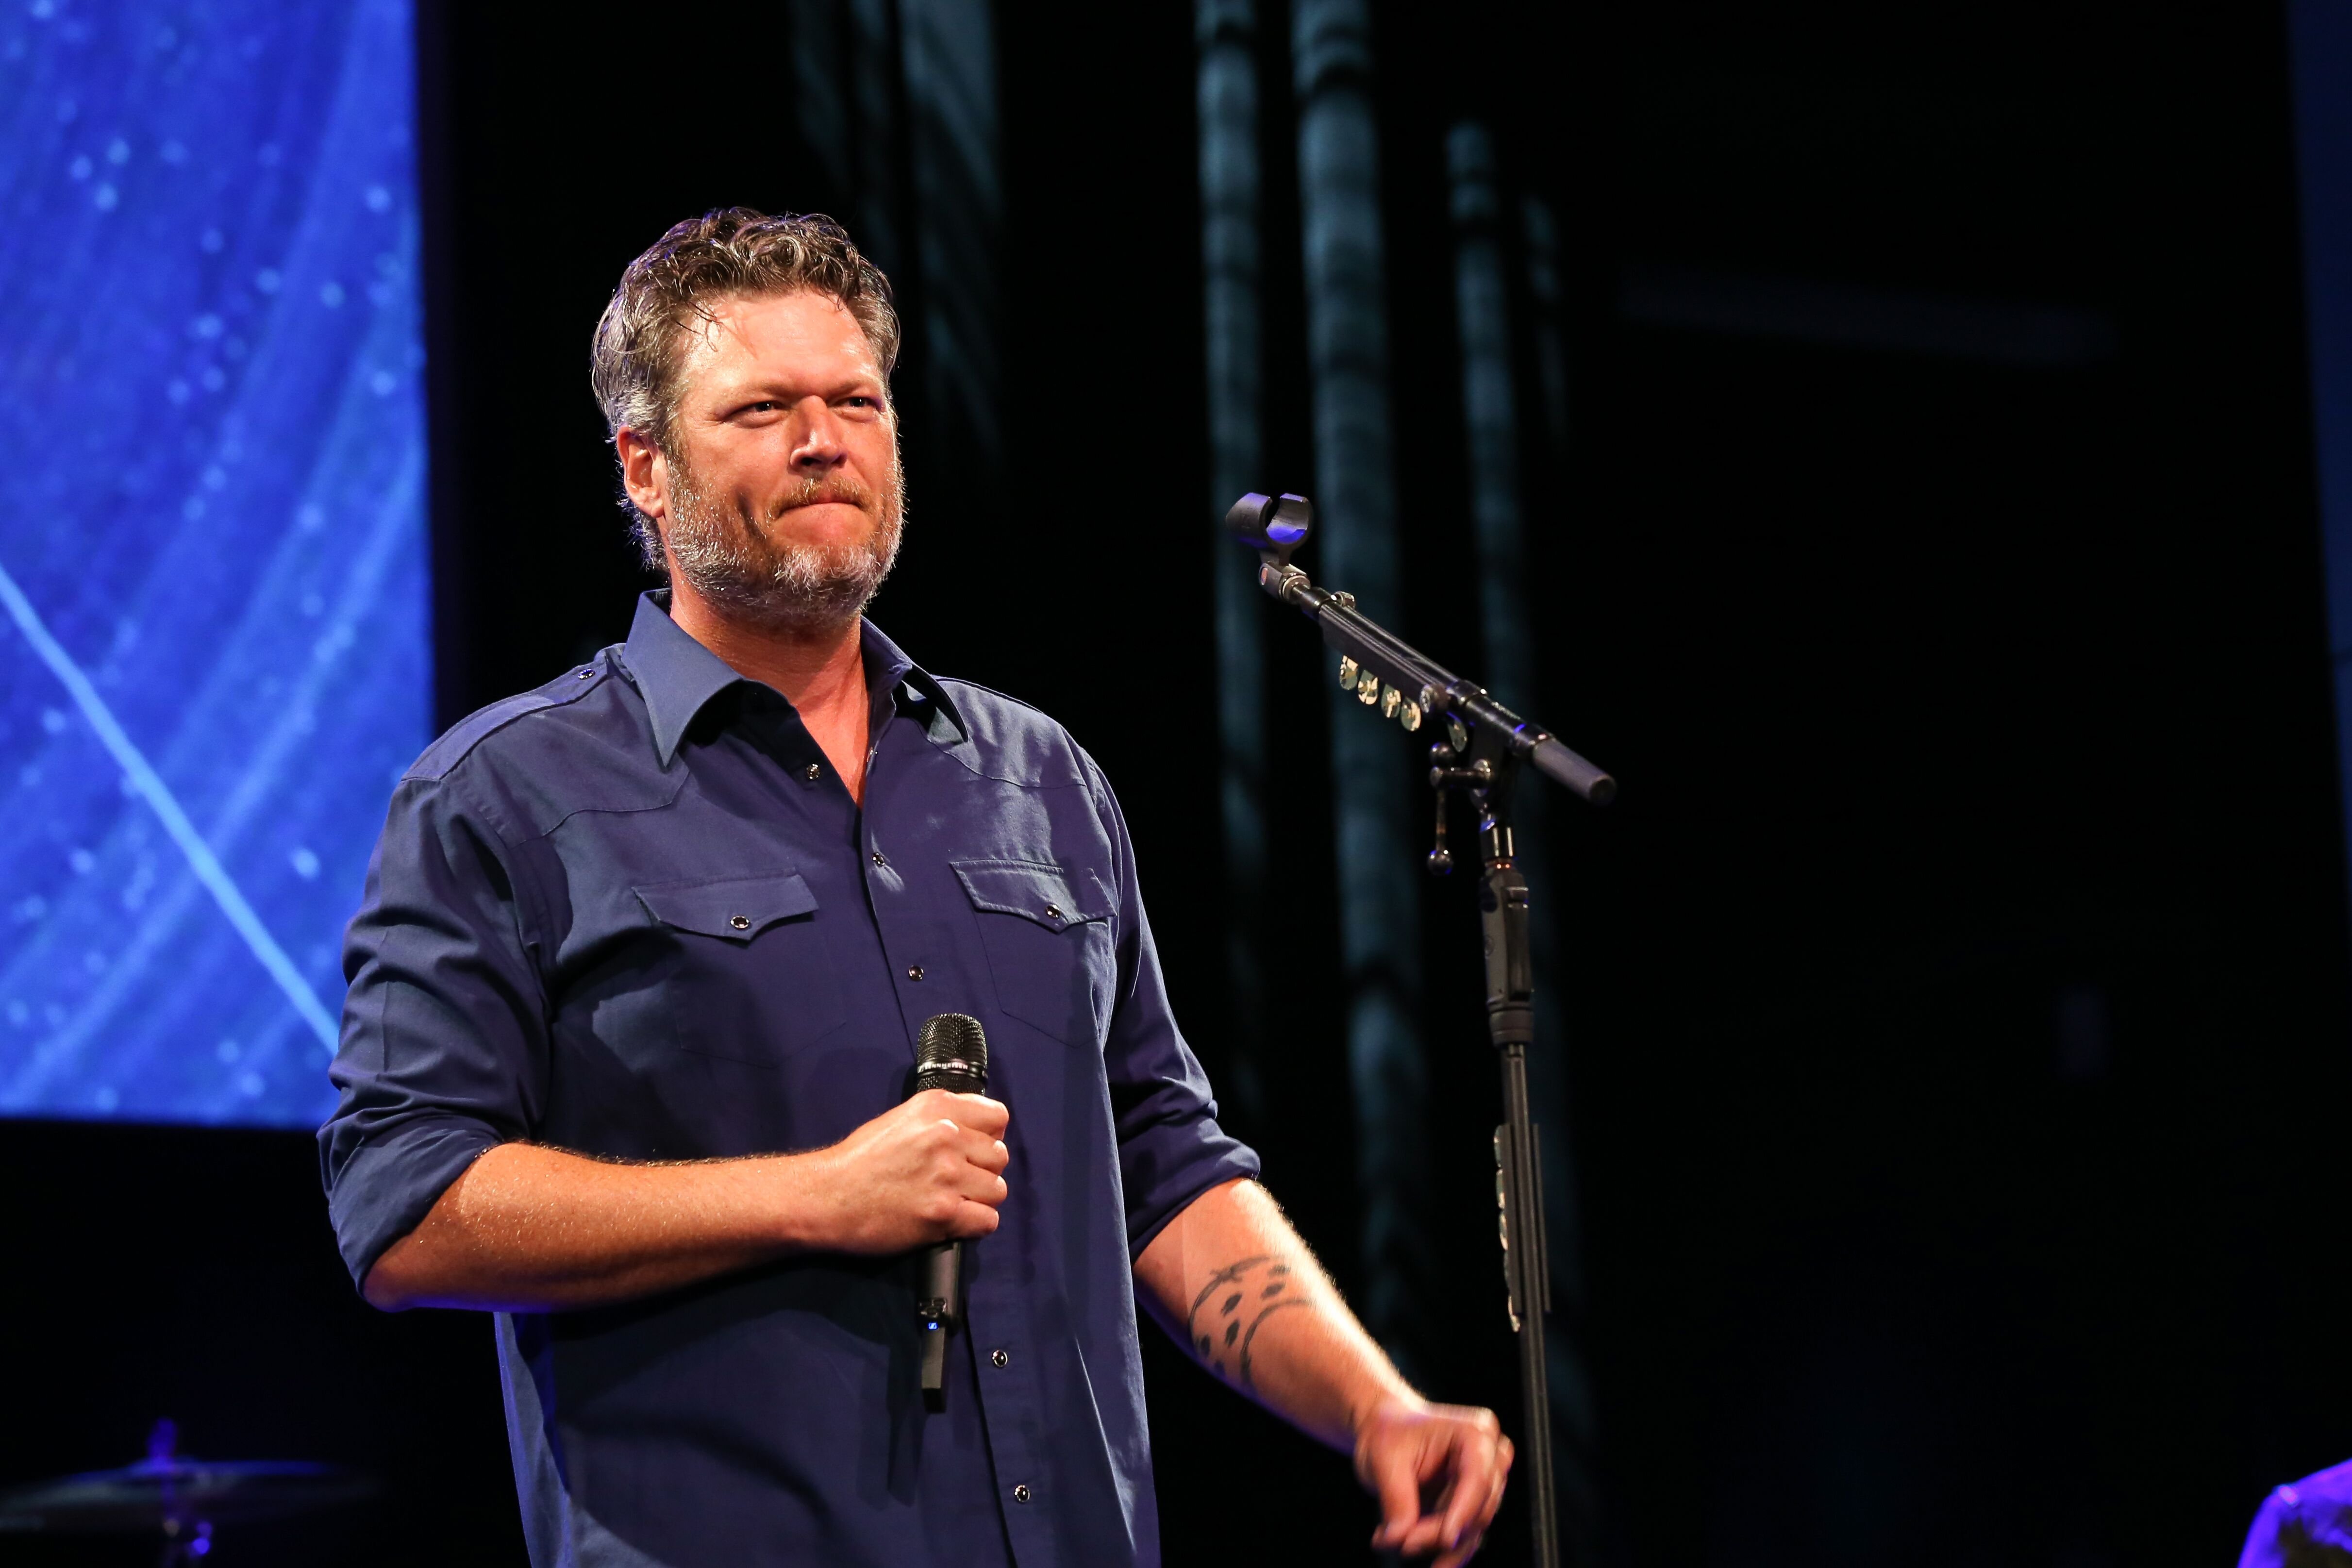 Blake Shelton at the Musicians On Call 20th Anniversary Kickoff Celebration on May 31, 2019, in Nashville, Tennessee | Photo: Terry Wyatt/Getty Images